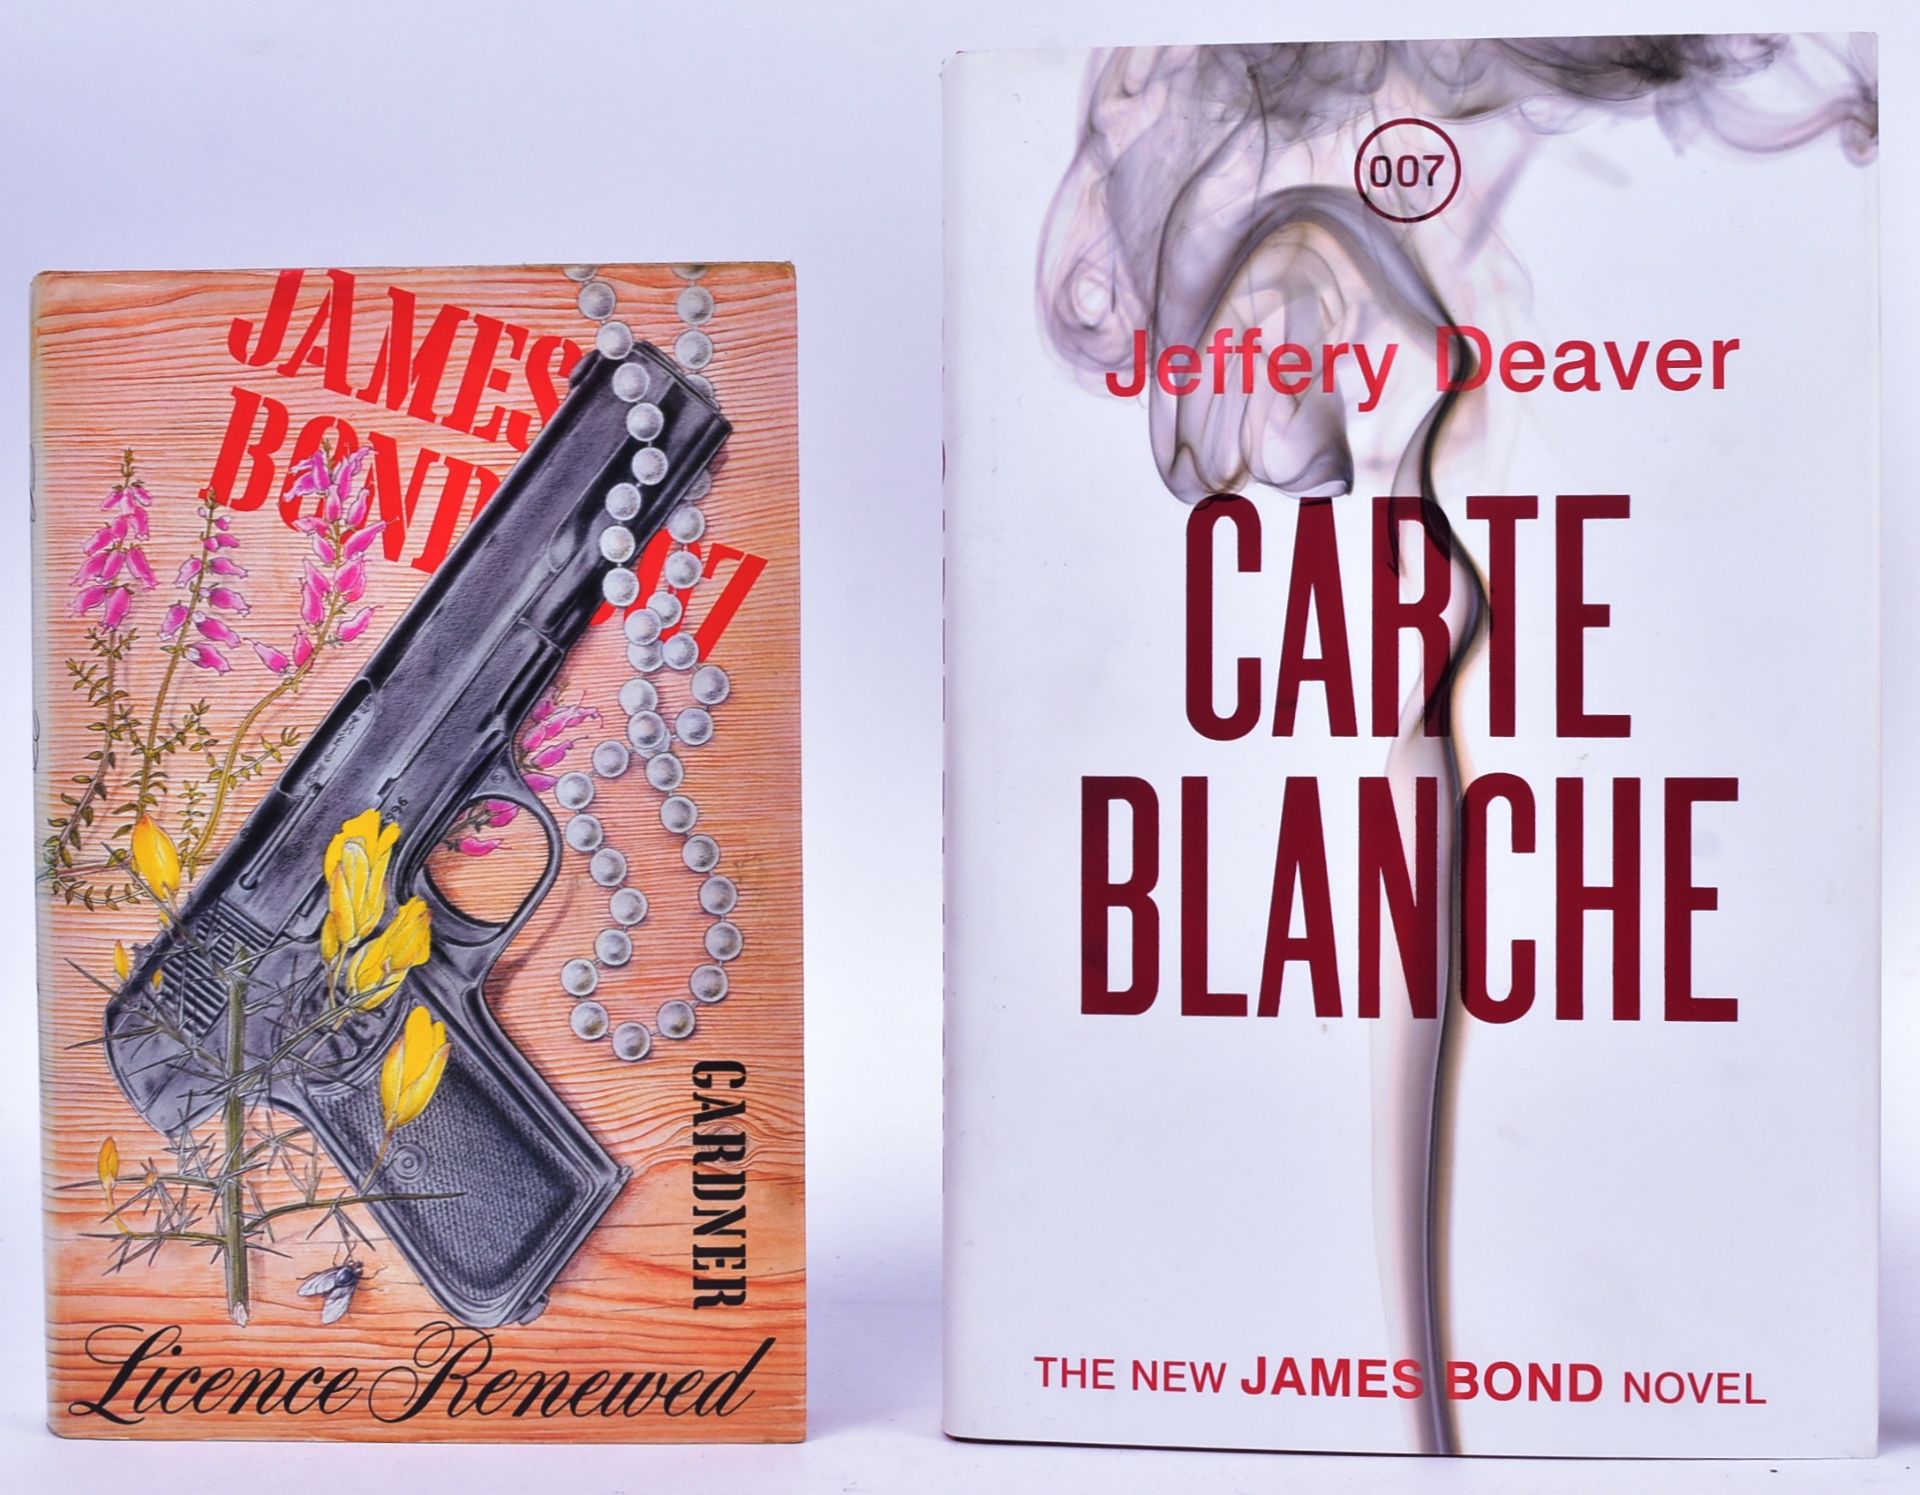 JAMES BOND - COLLECTION OF FIRST EDITION BOOKS - Image 2 of 5